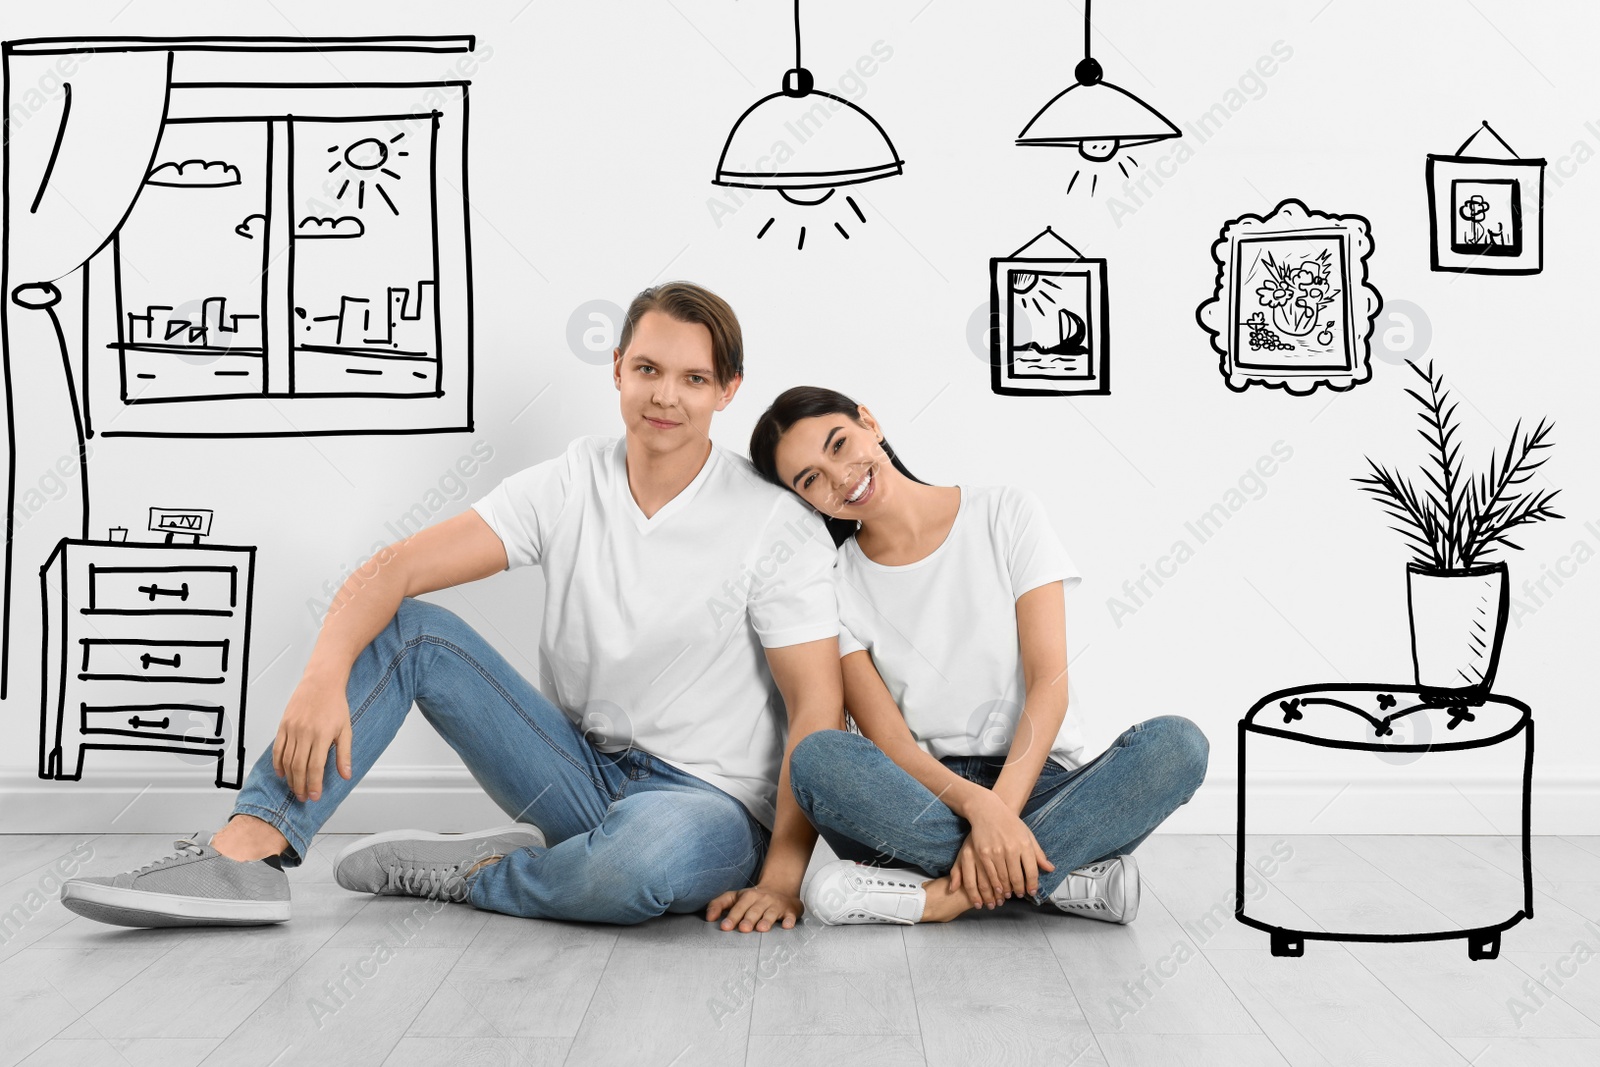 Image of Happy couple dreaming about renovation on floor. Illustrated interior design